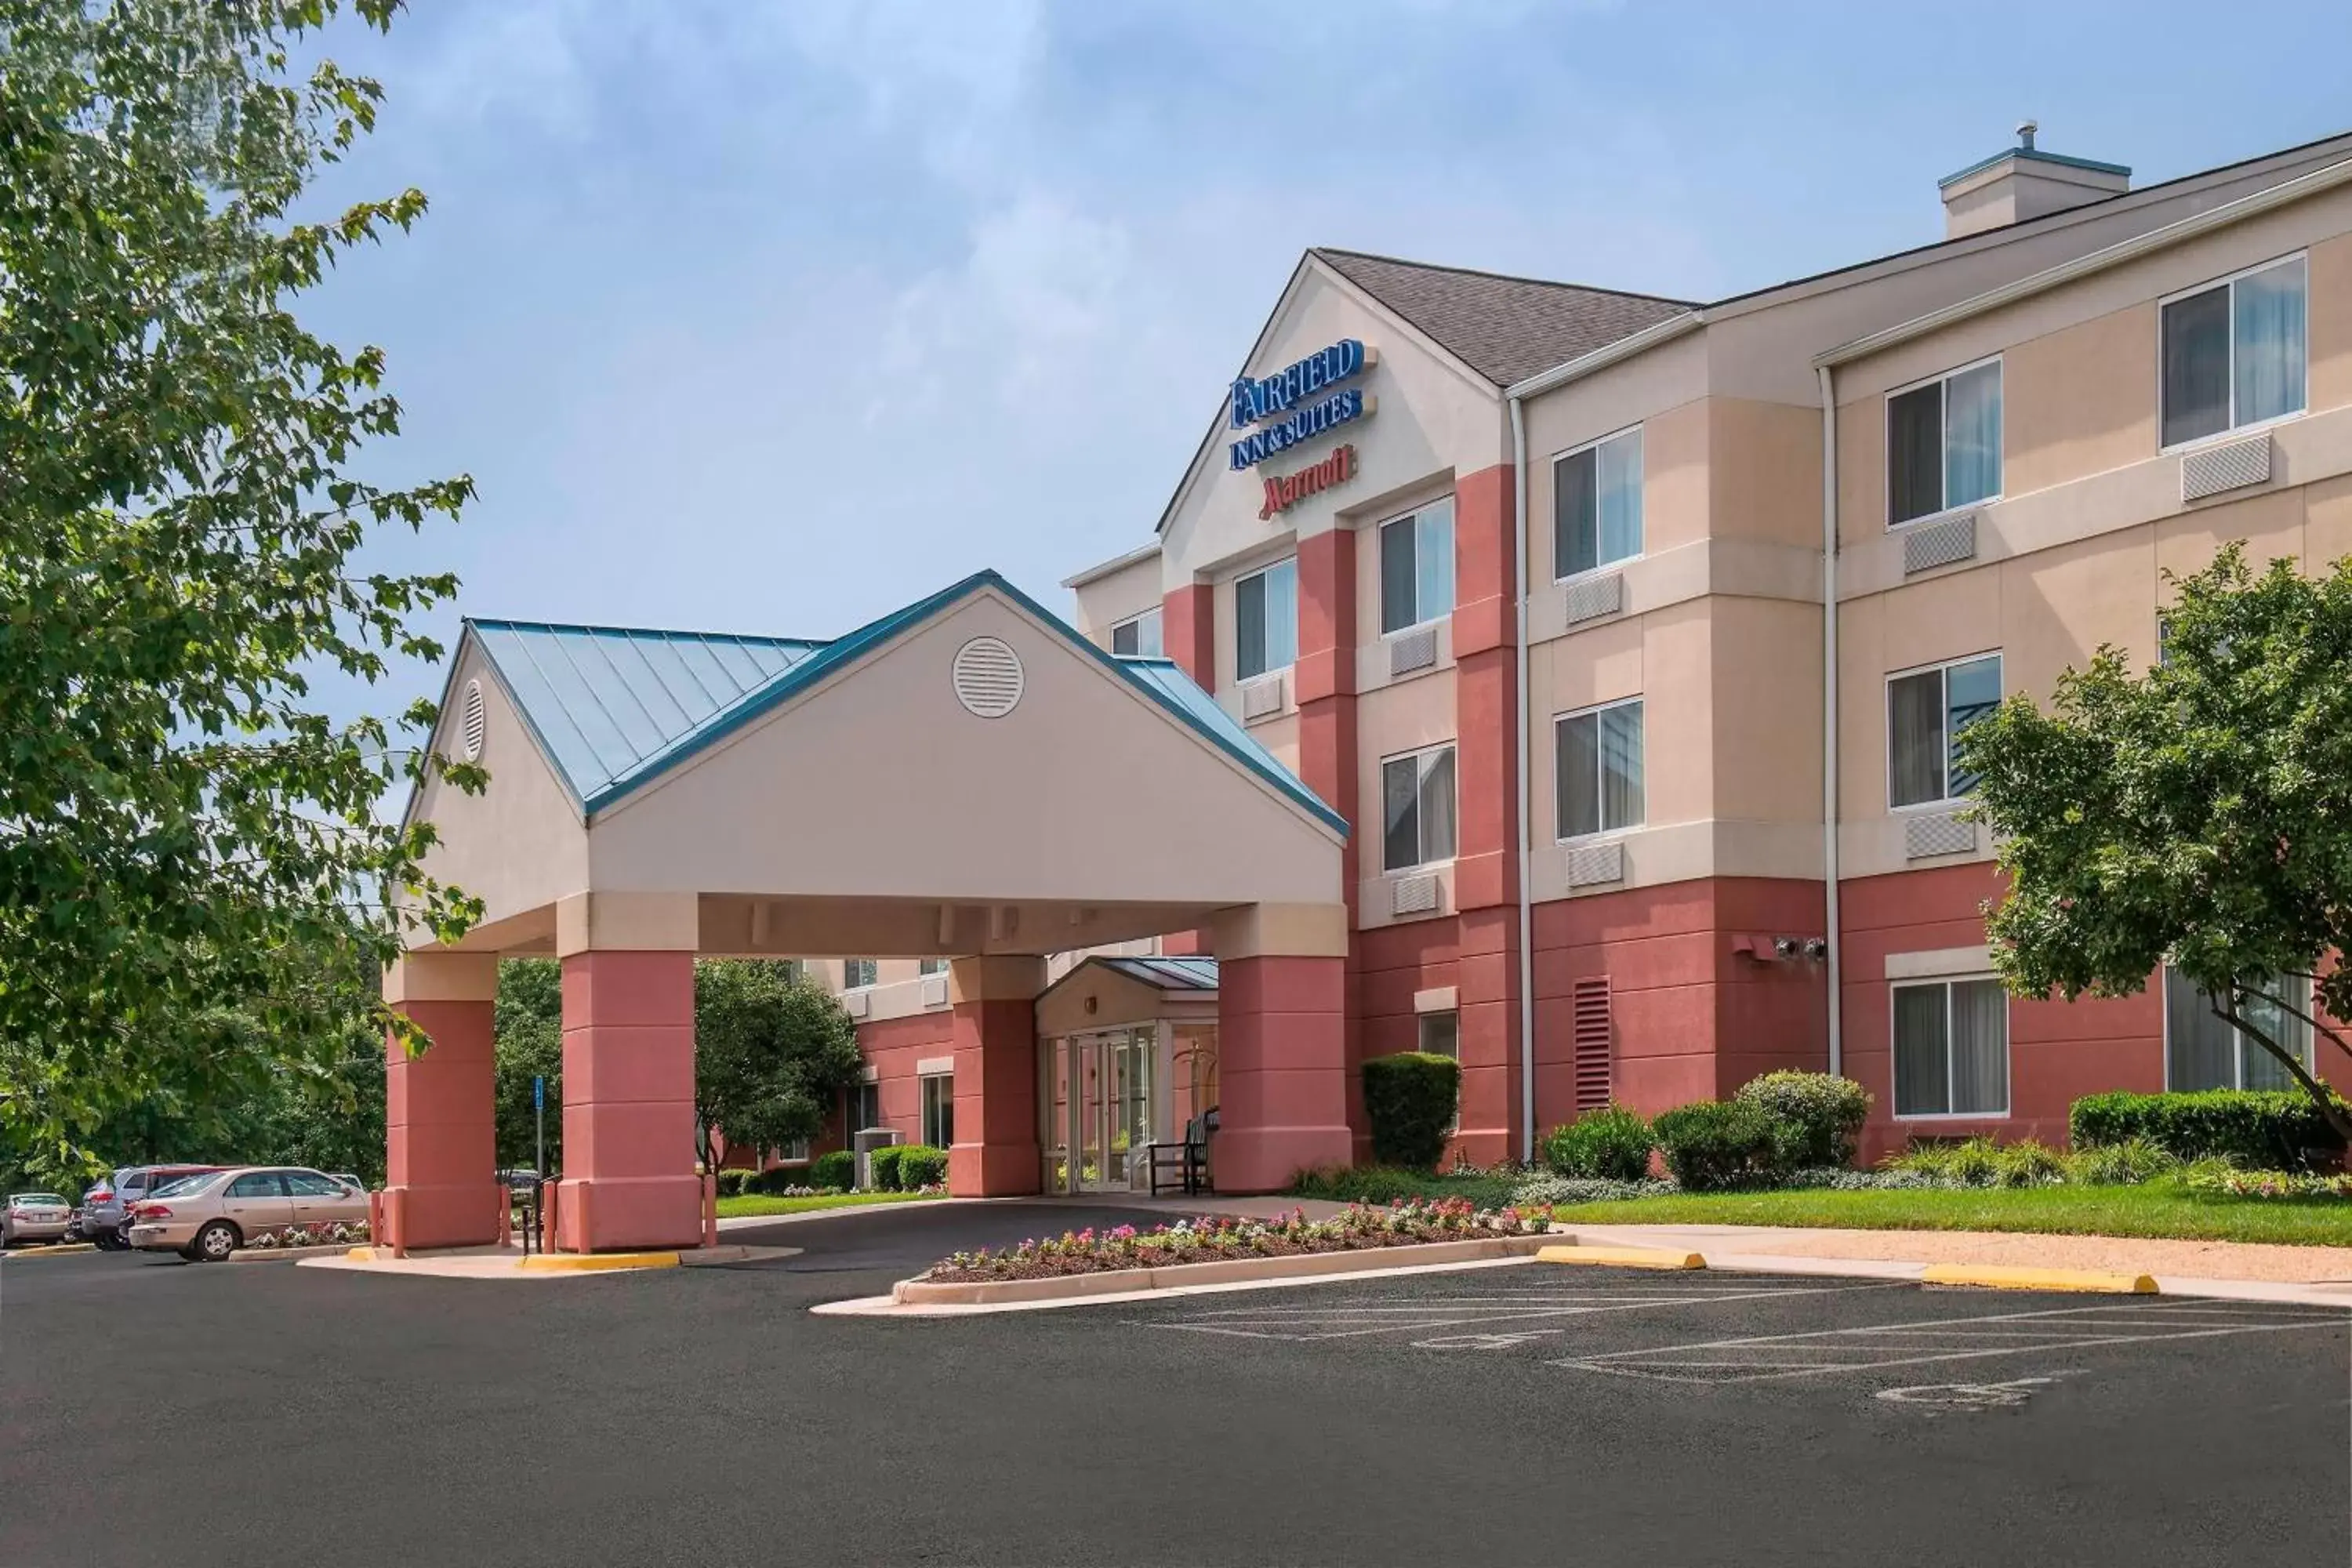 Property Building in Fairfield Inn Dulles Airport Chantilly